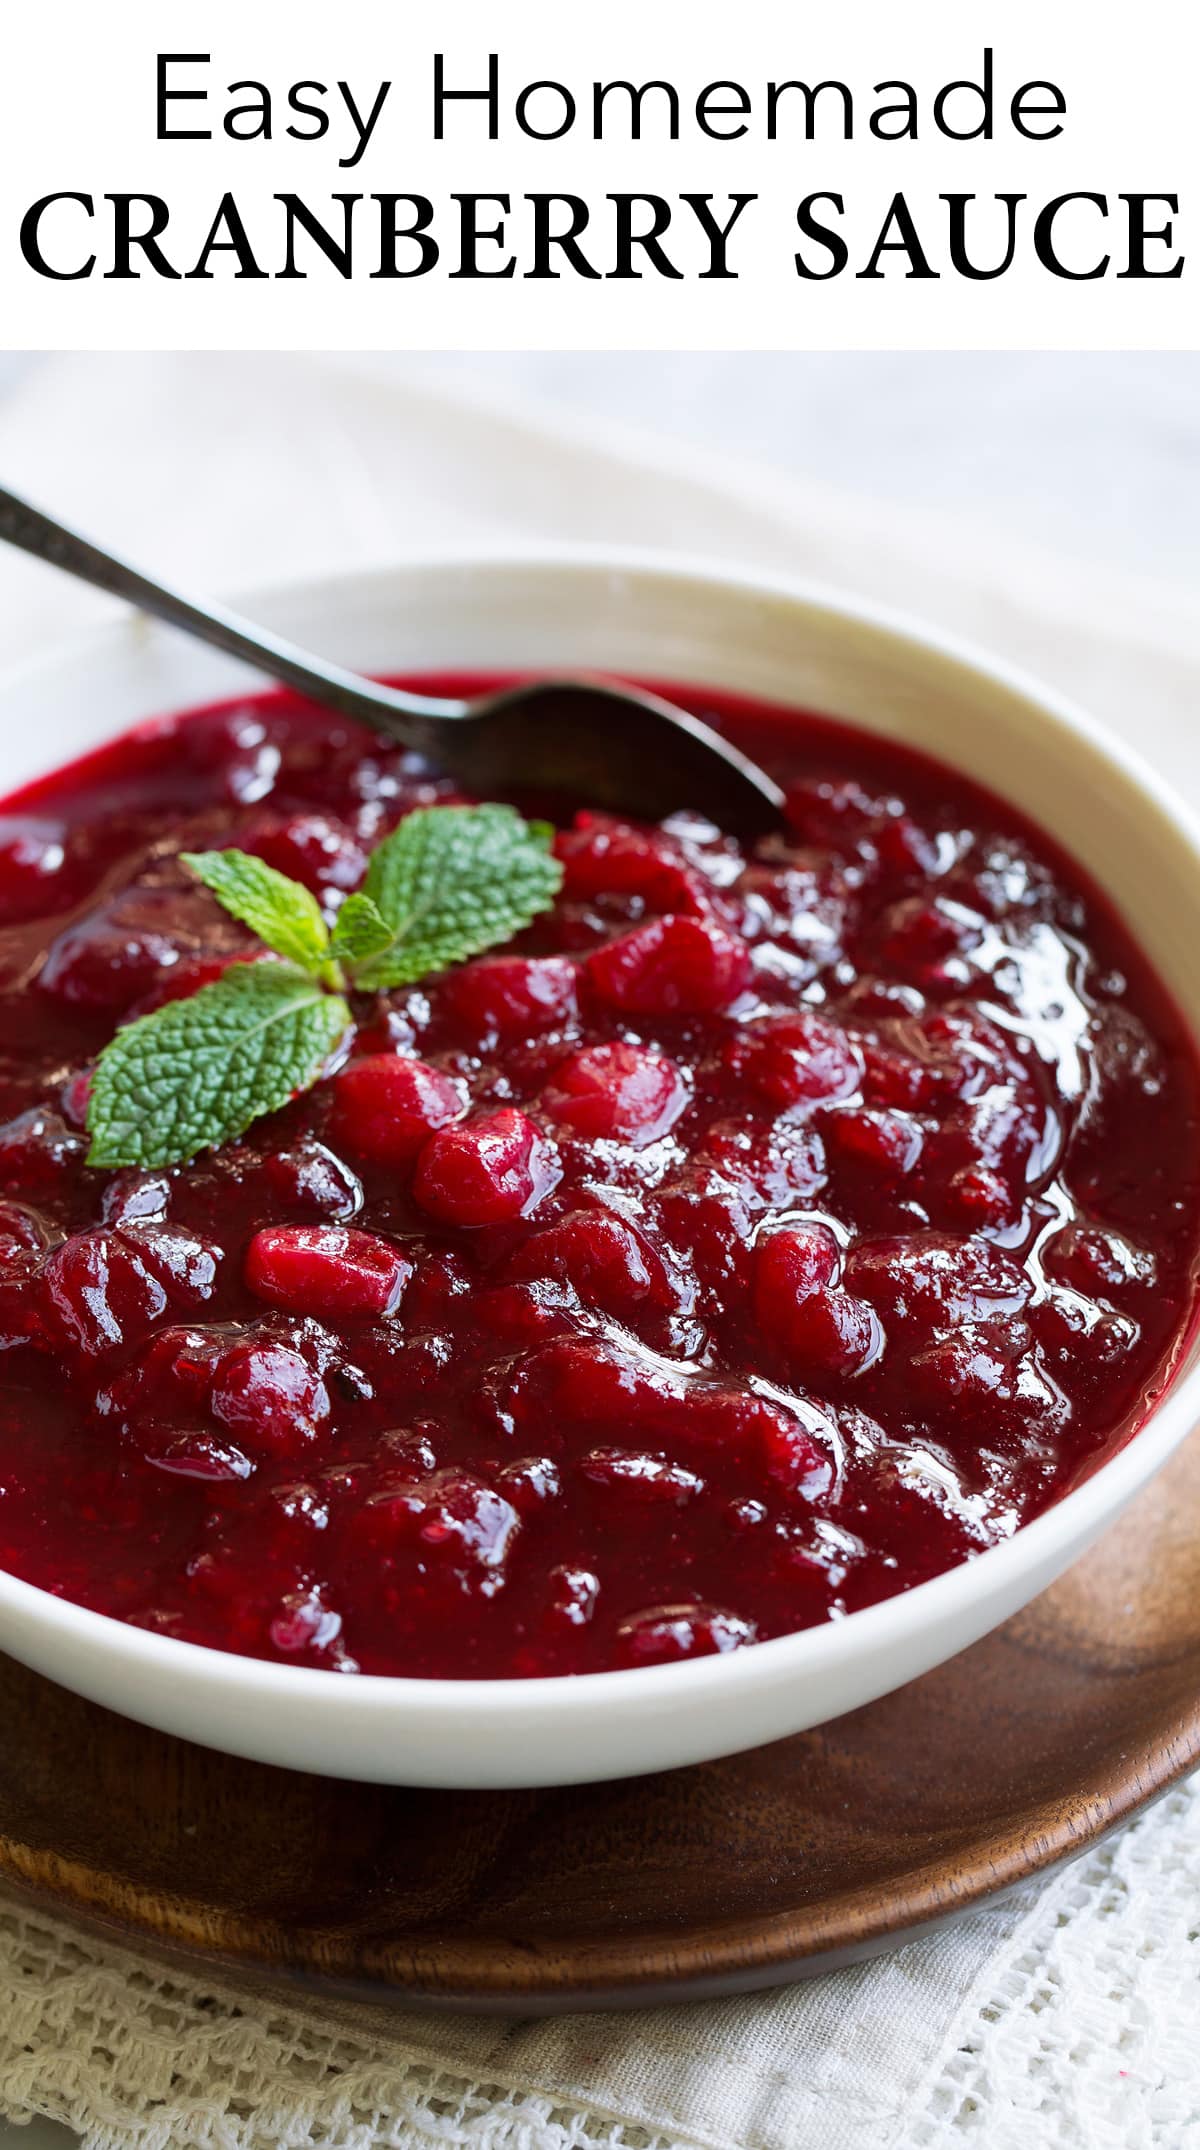 Cranberry Sauce Recipe (Fresh and Easy!) - Cooking Classy